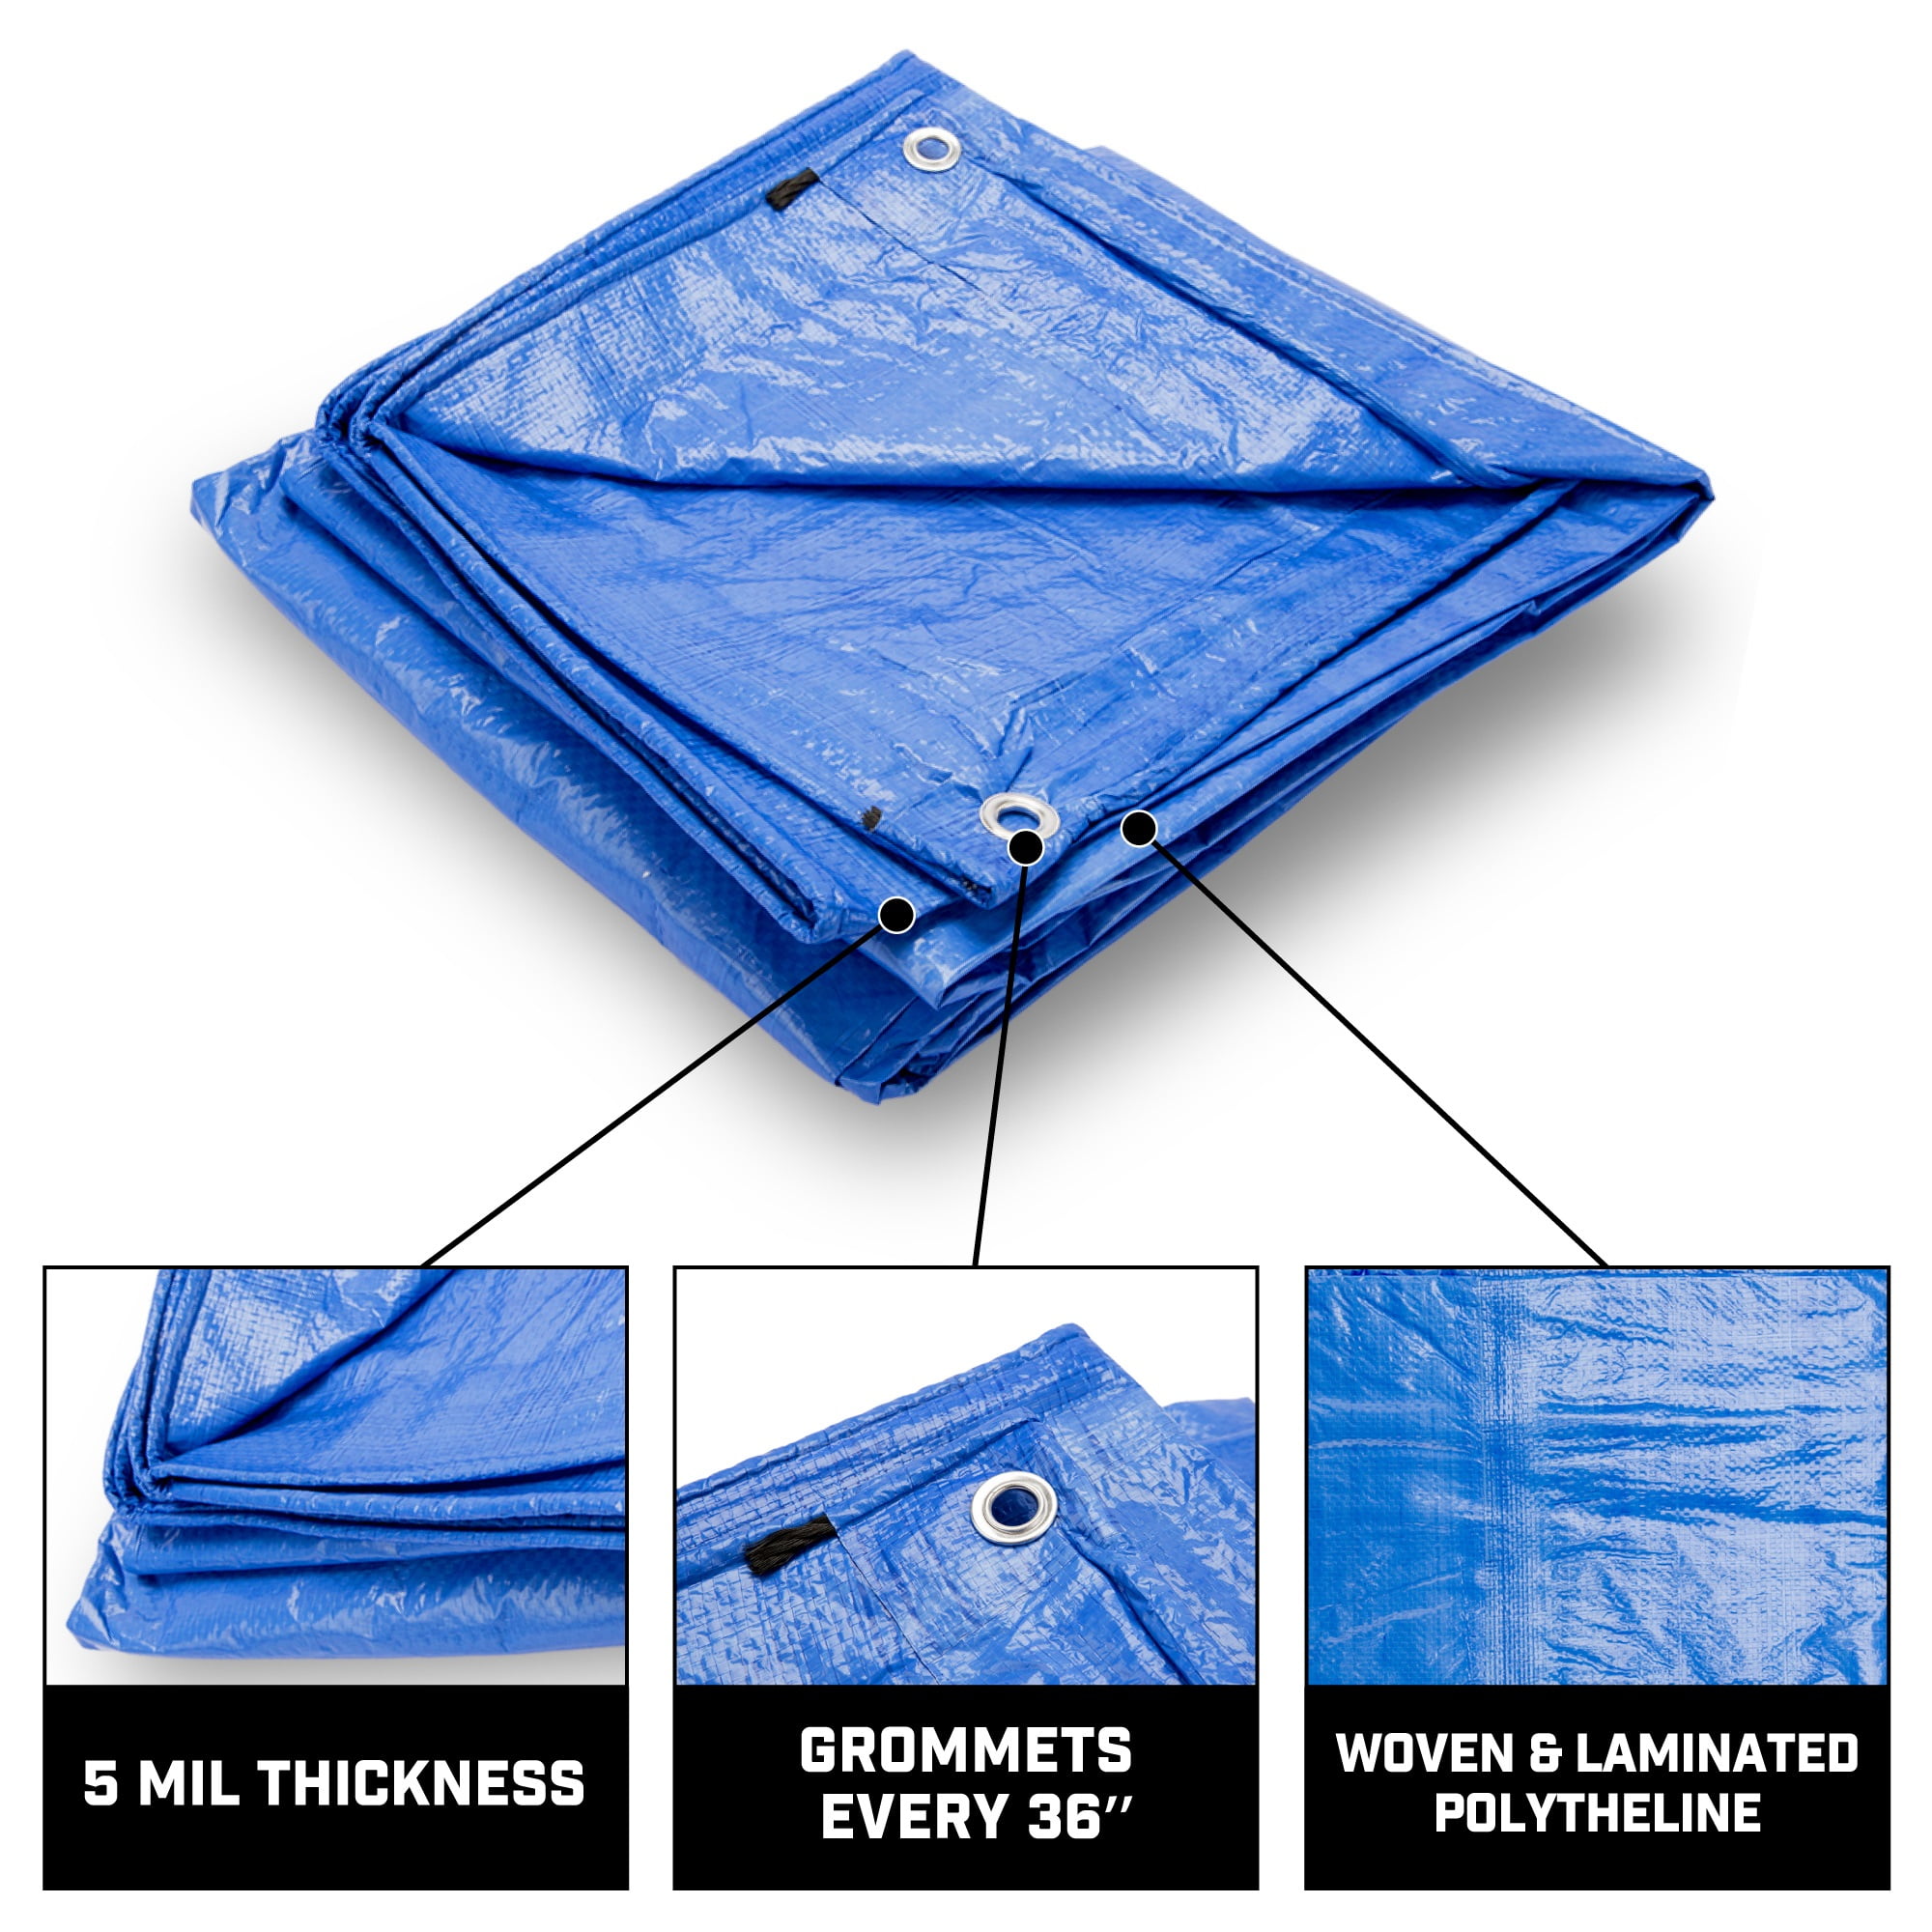 Pack of 6 Grizzly Tarp BA-GT-6X8-BL-6 5-mil Waterproof Poly Tarp Cover 6x8 Tent Shelter Camping Tarpaulin by Grizzly Tarps 